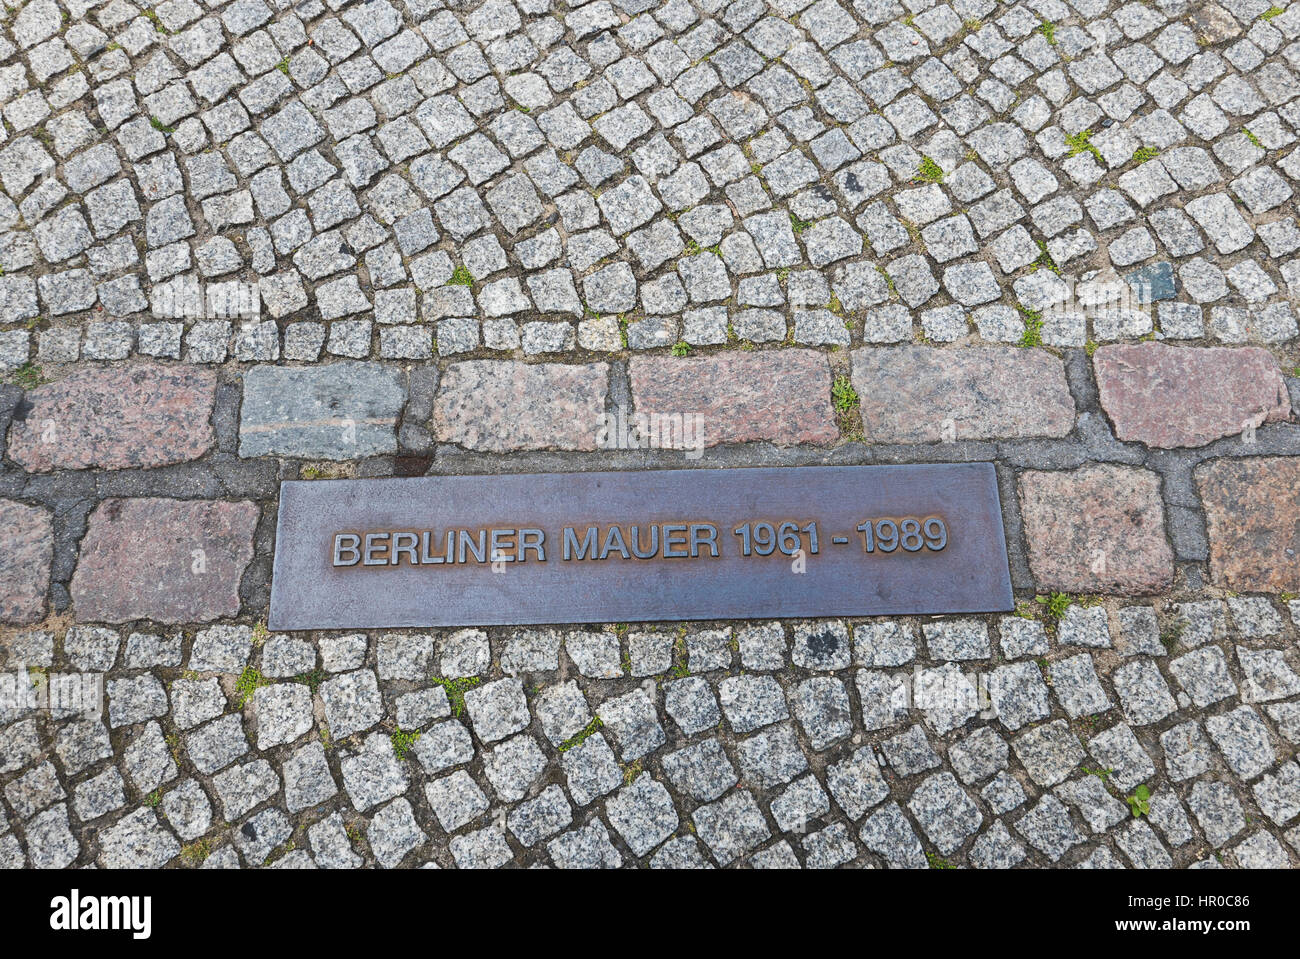 A memorial metal plaque on the road where the Berlin wall stood to divide East and West Berlin, Germany Stock Photo